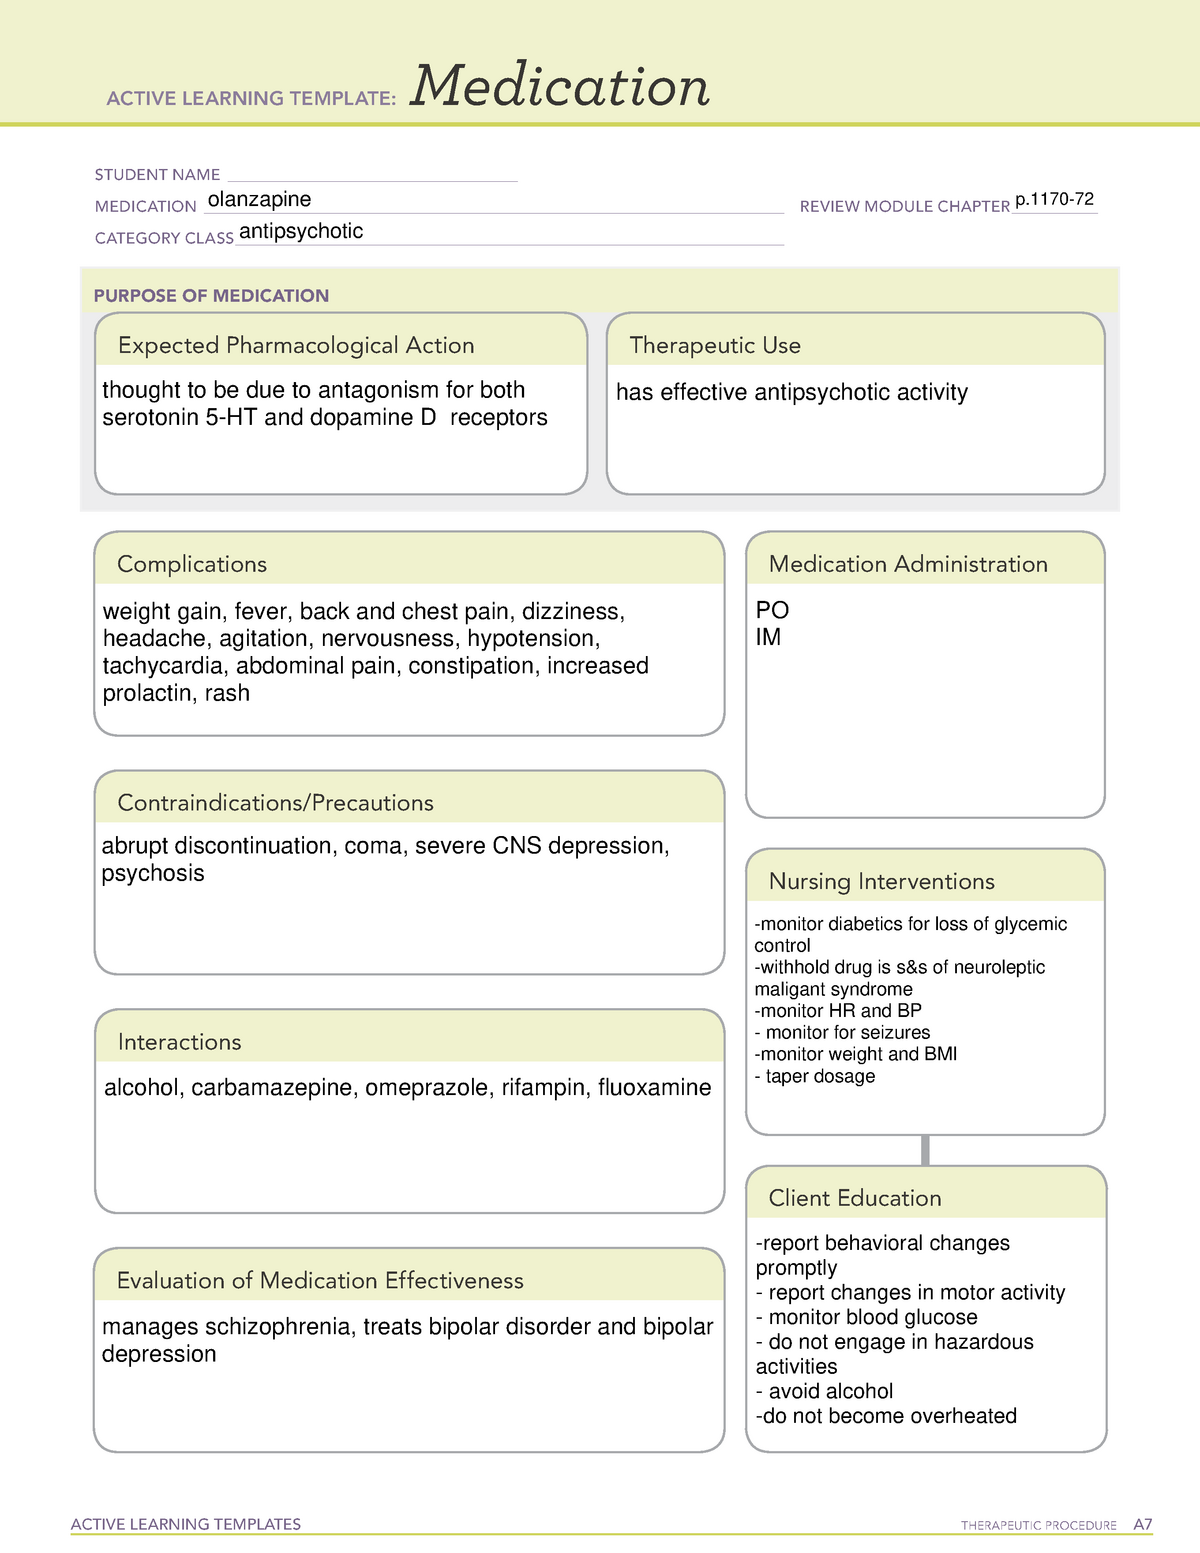 Olanzapine Medication ATI template ACTIVE LEARNING TEMPLATES